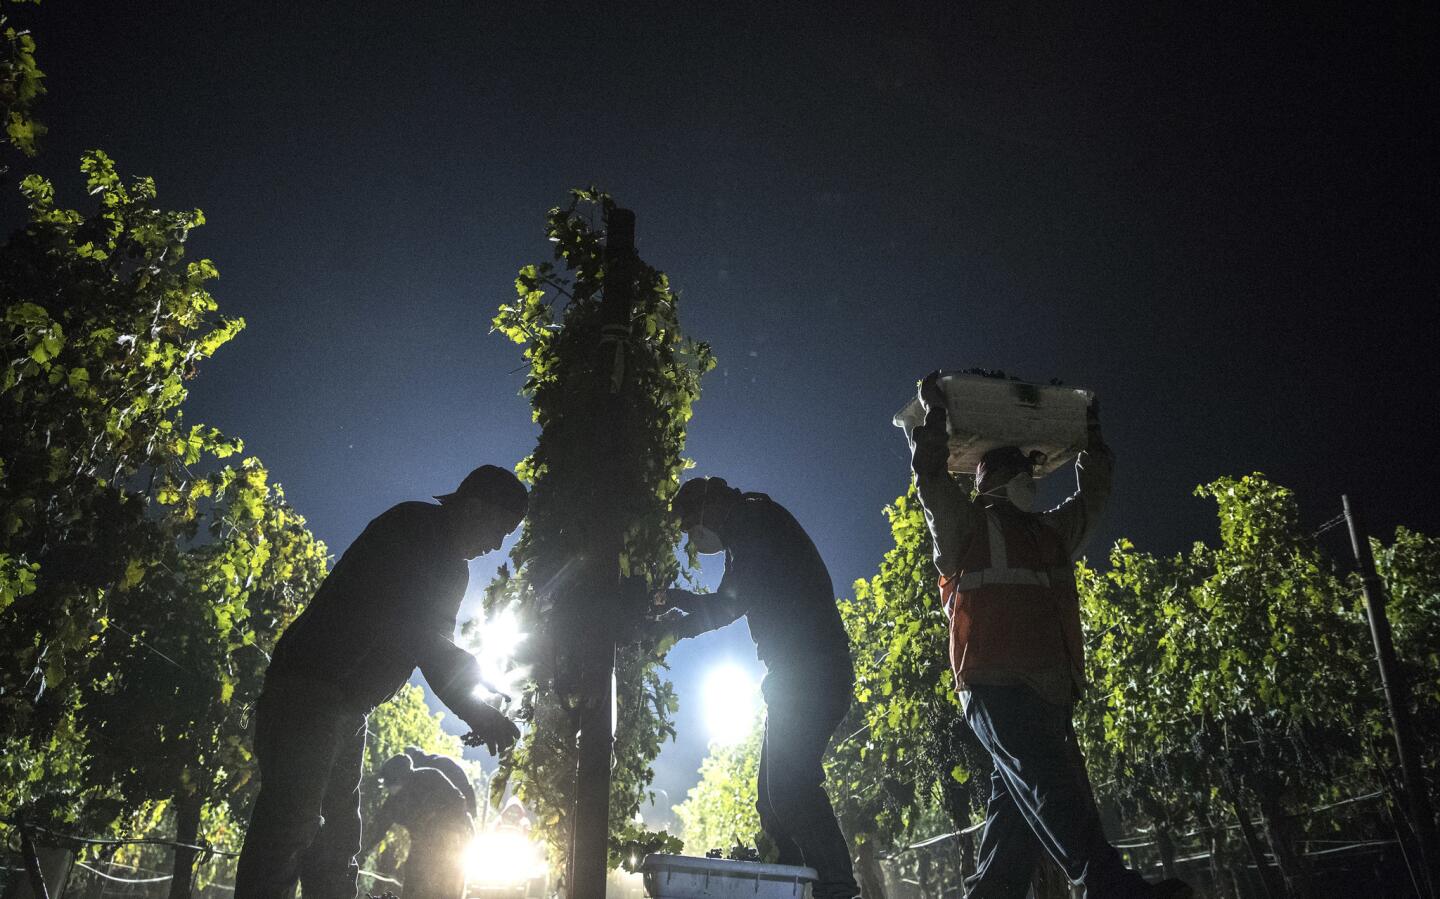 Workers pick cabernet sauvignon grapes by hand in the cool of the night at a Napa Valley vineyard owned by C. Mondavi & Family as a haze from area wildfires hovers in the air.